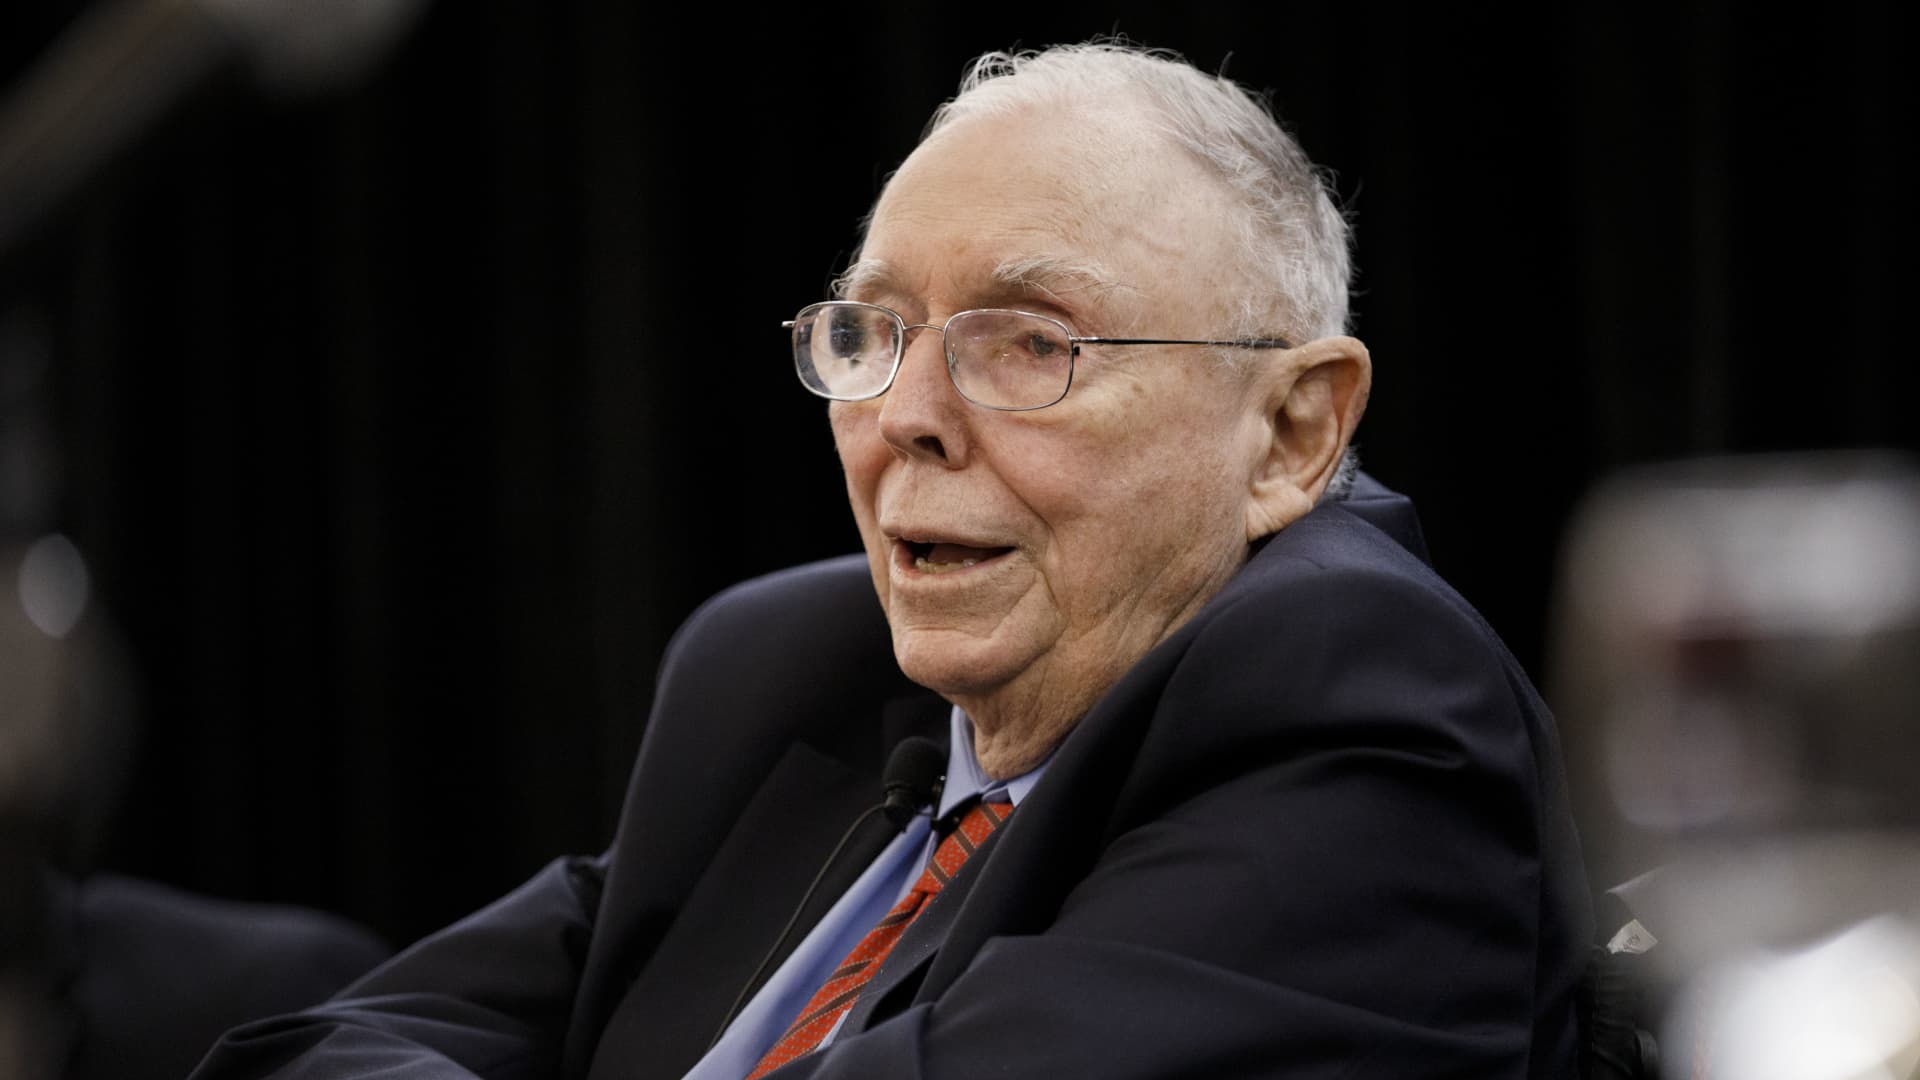 Billionaire Charlie Munger: Cryptocurrency is ‘crazy, stupid gambling,’ and ‘people who oppose my position are idiots’